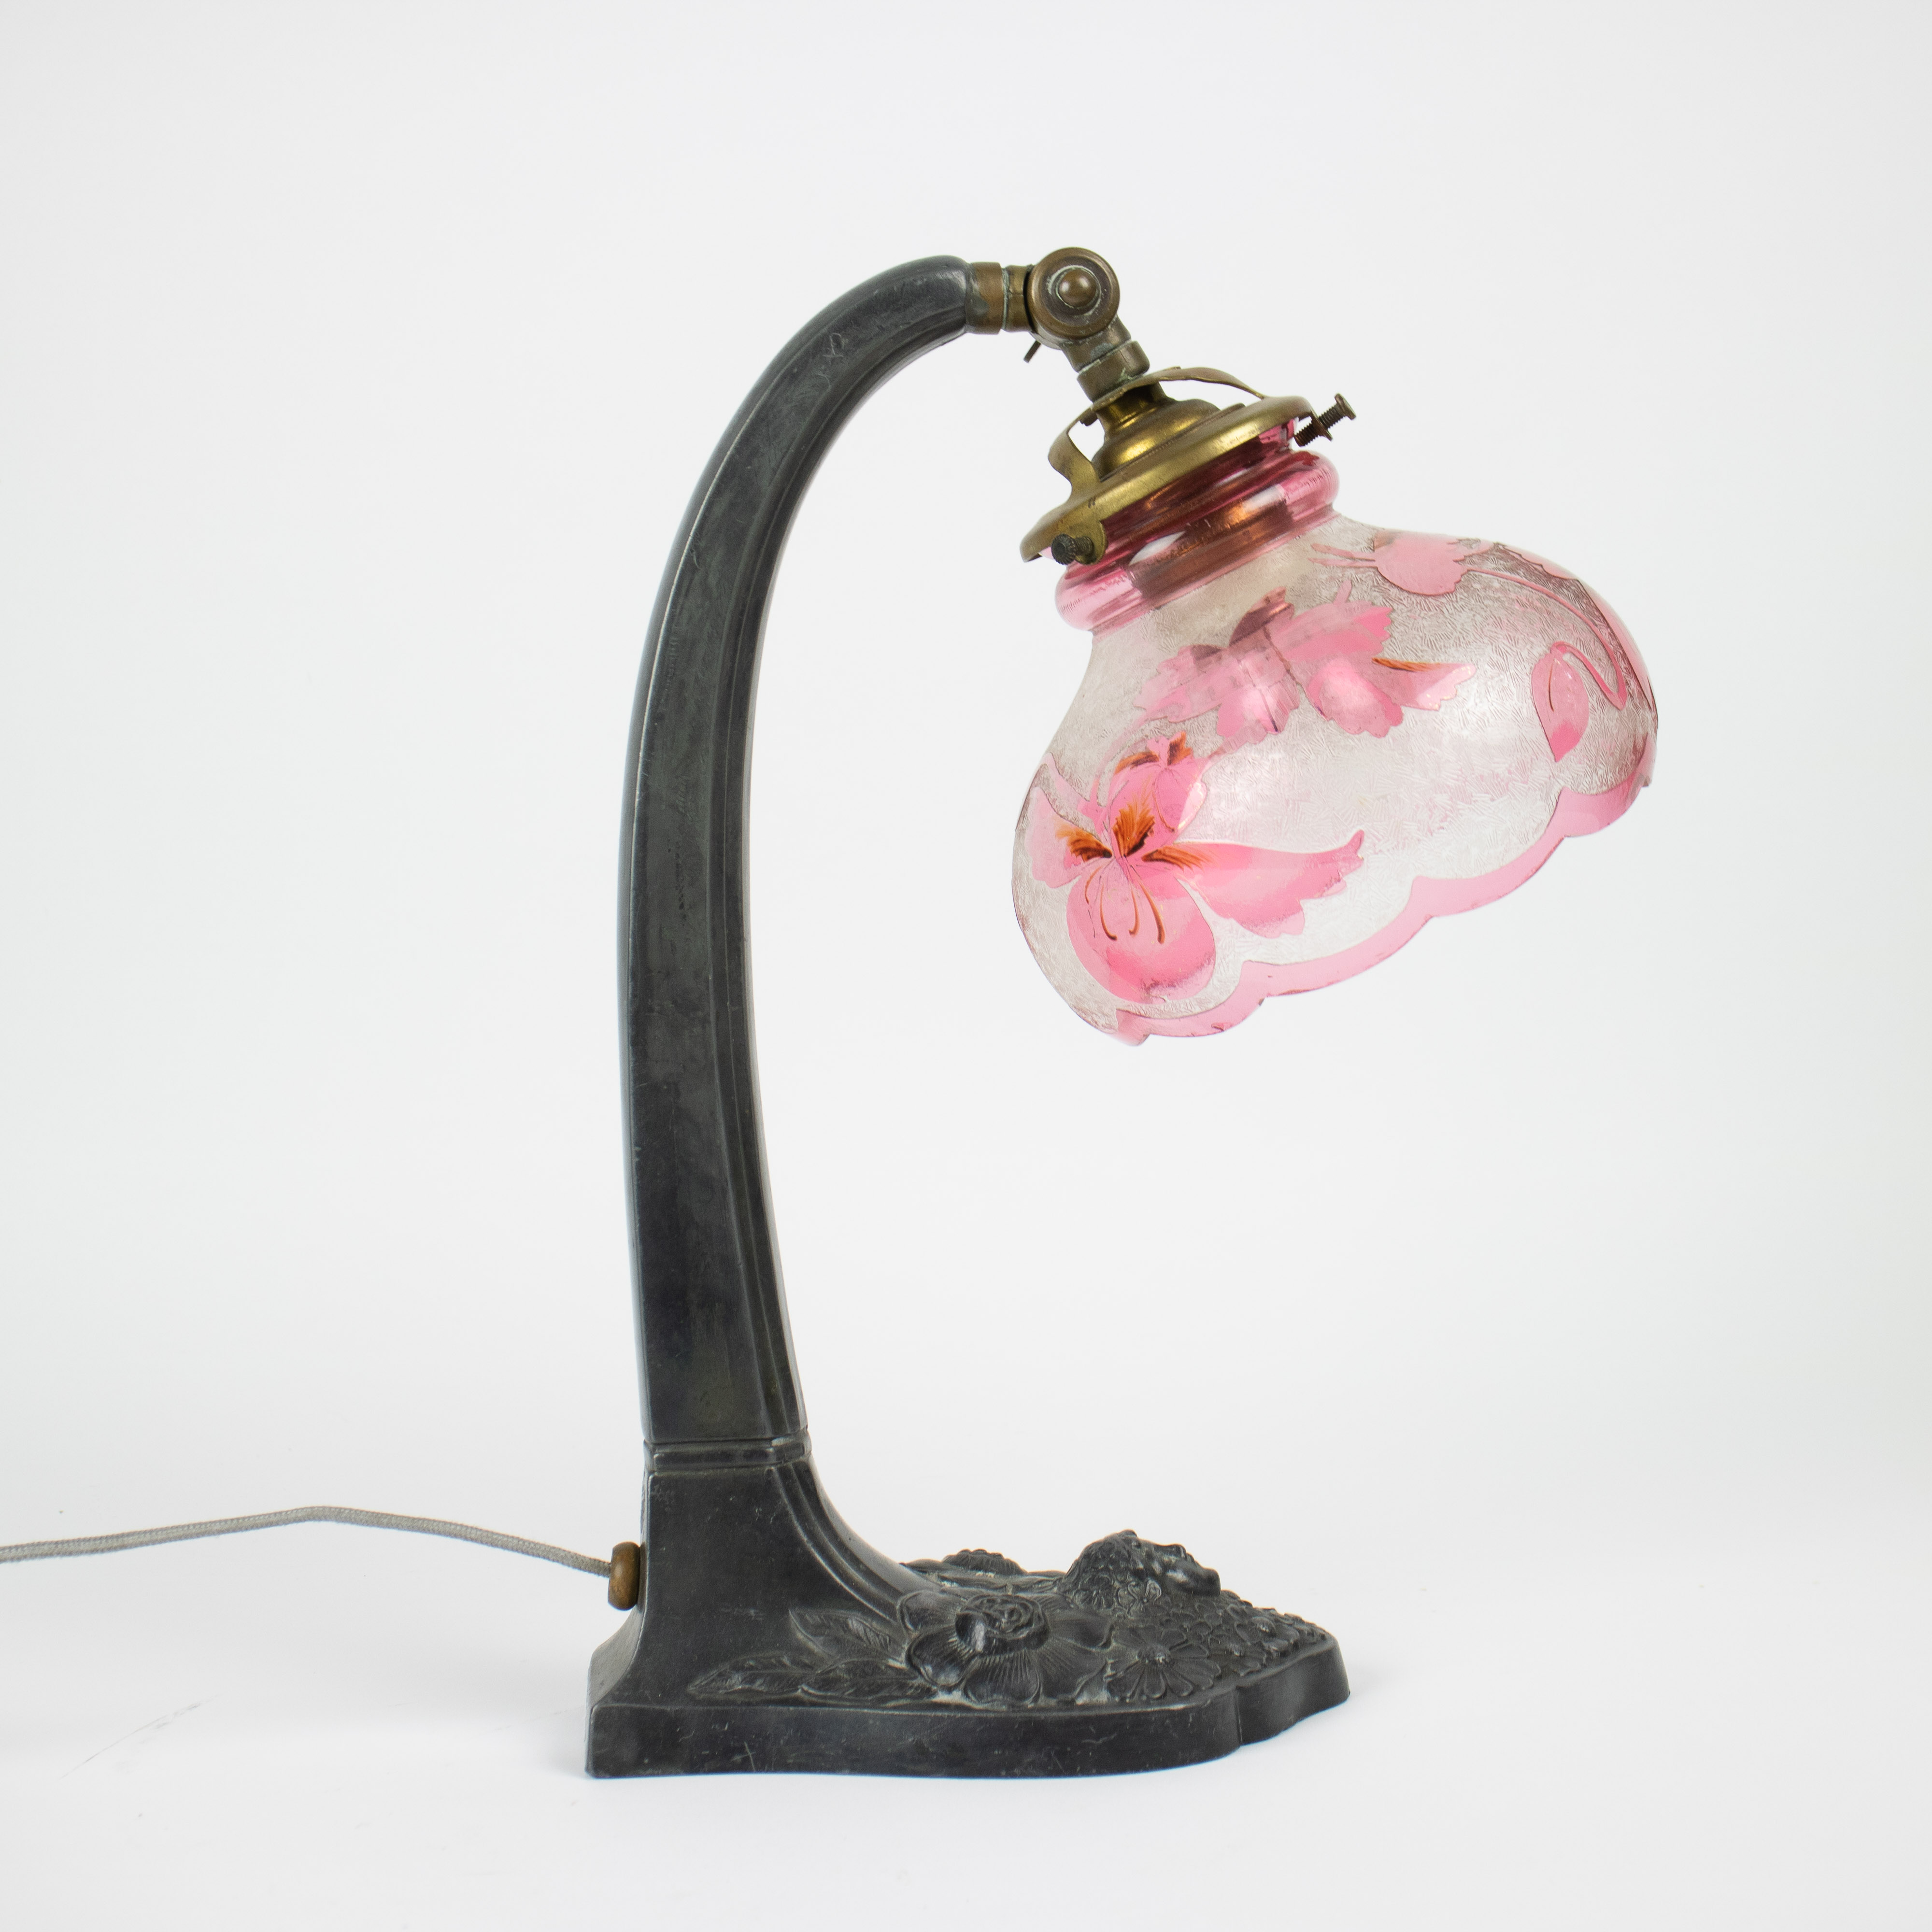 Table lamp with a Val Saint Lambert glass shade - Image 4 of 4